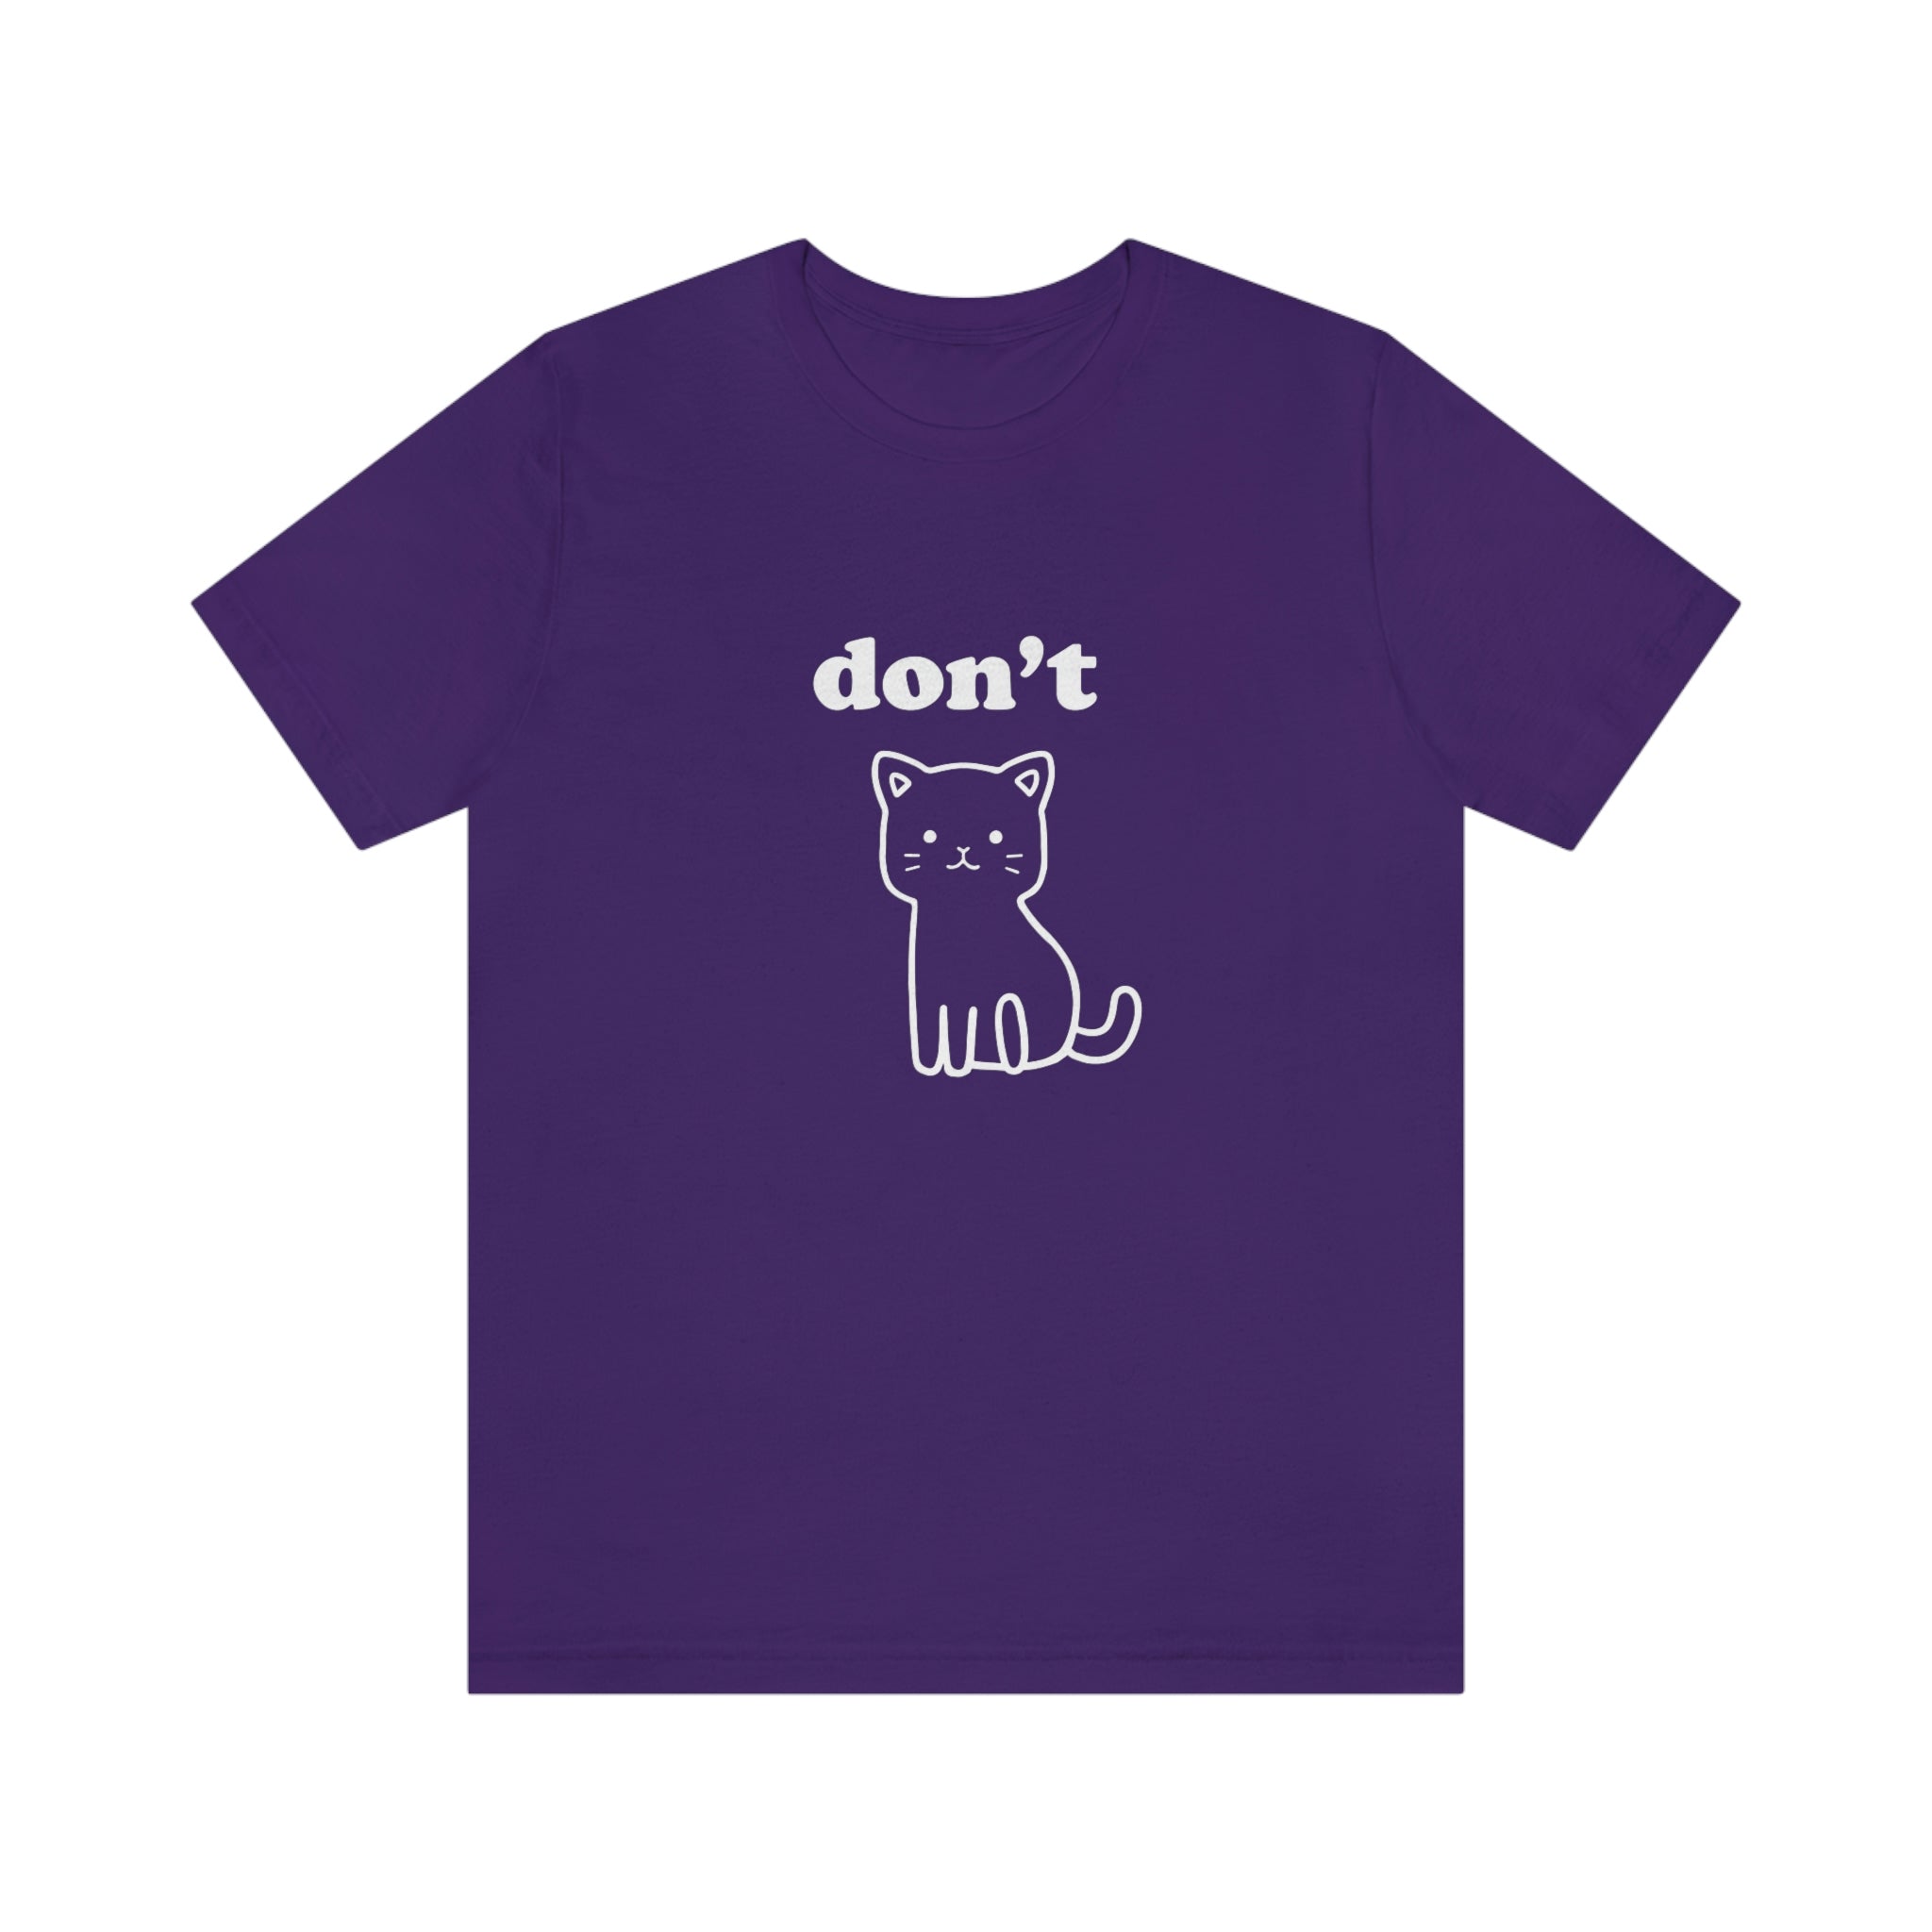 Don't Kitty : Unisex 100% Comfy Cotton T-Shirt by Bella+Canvas